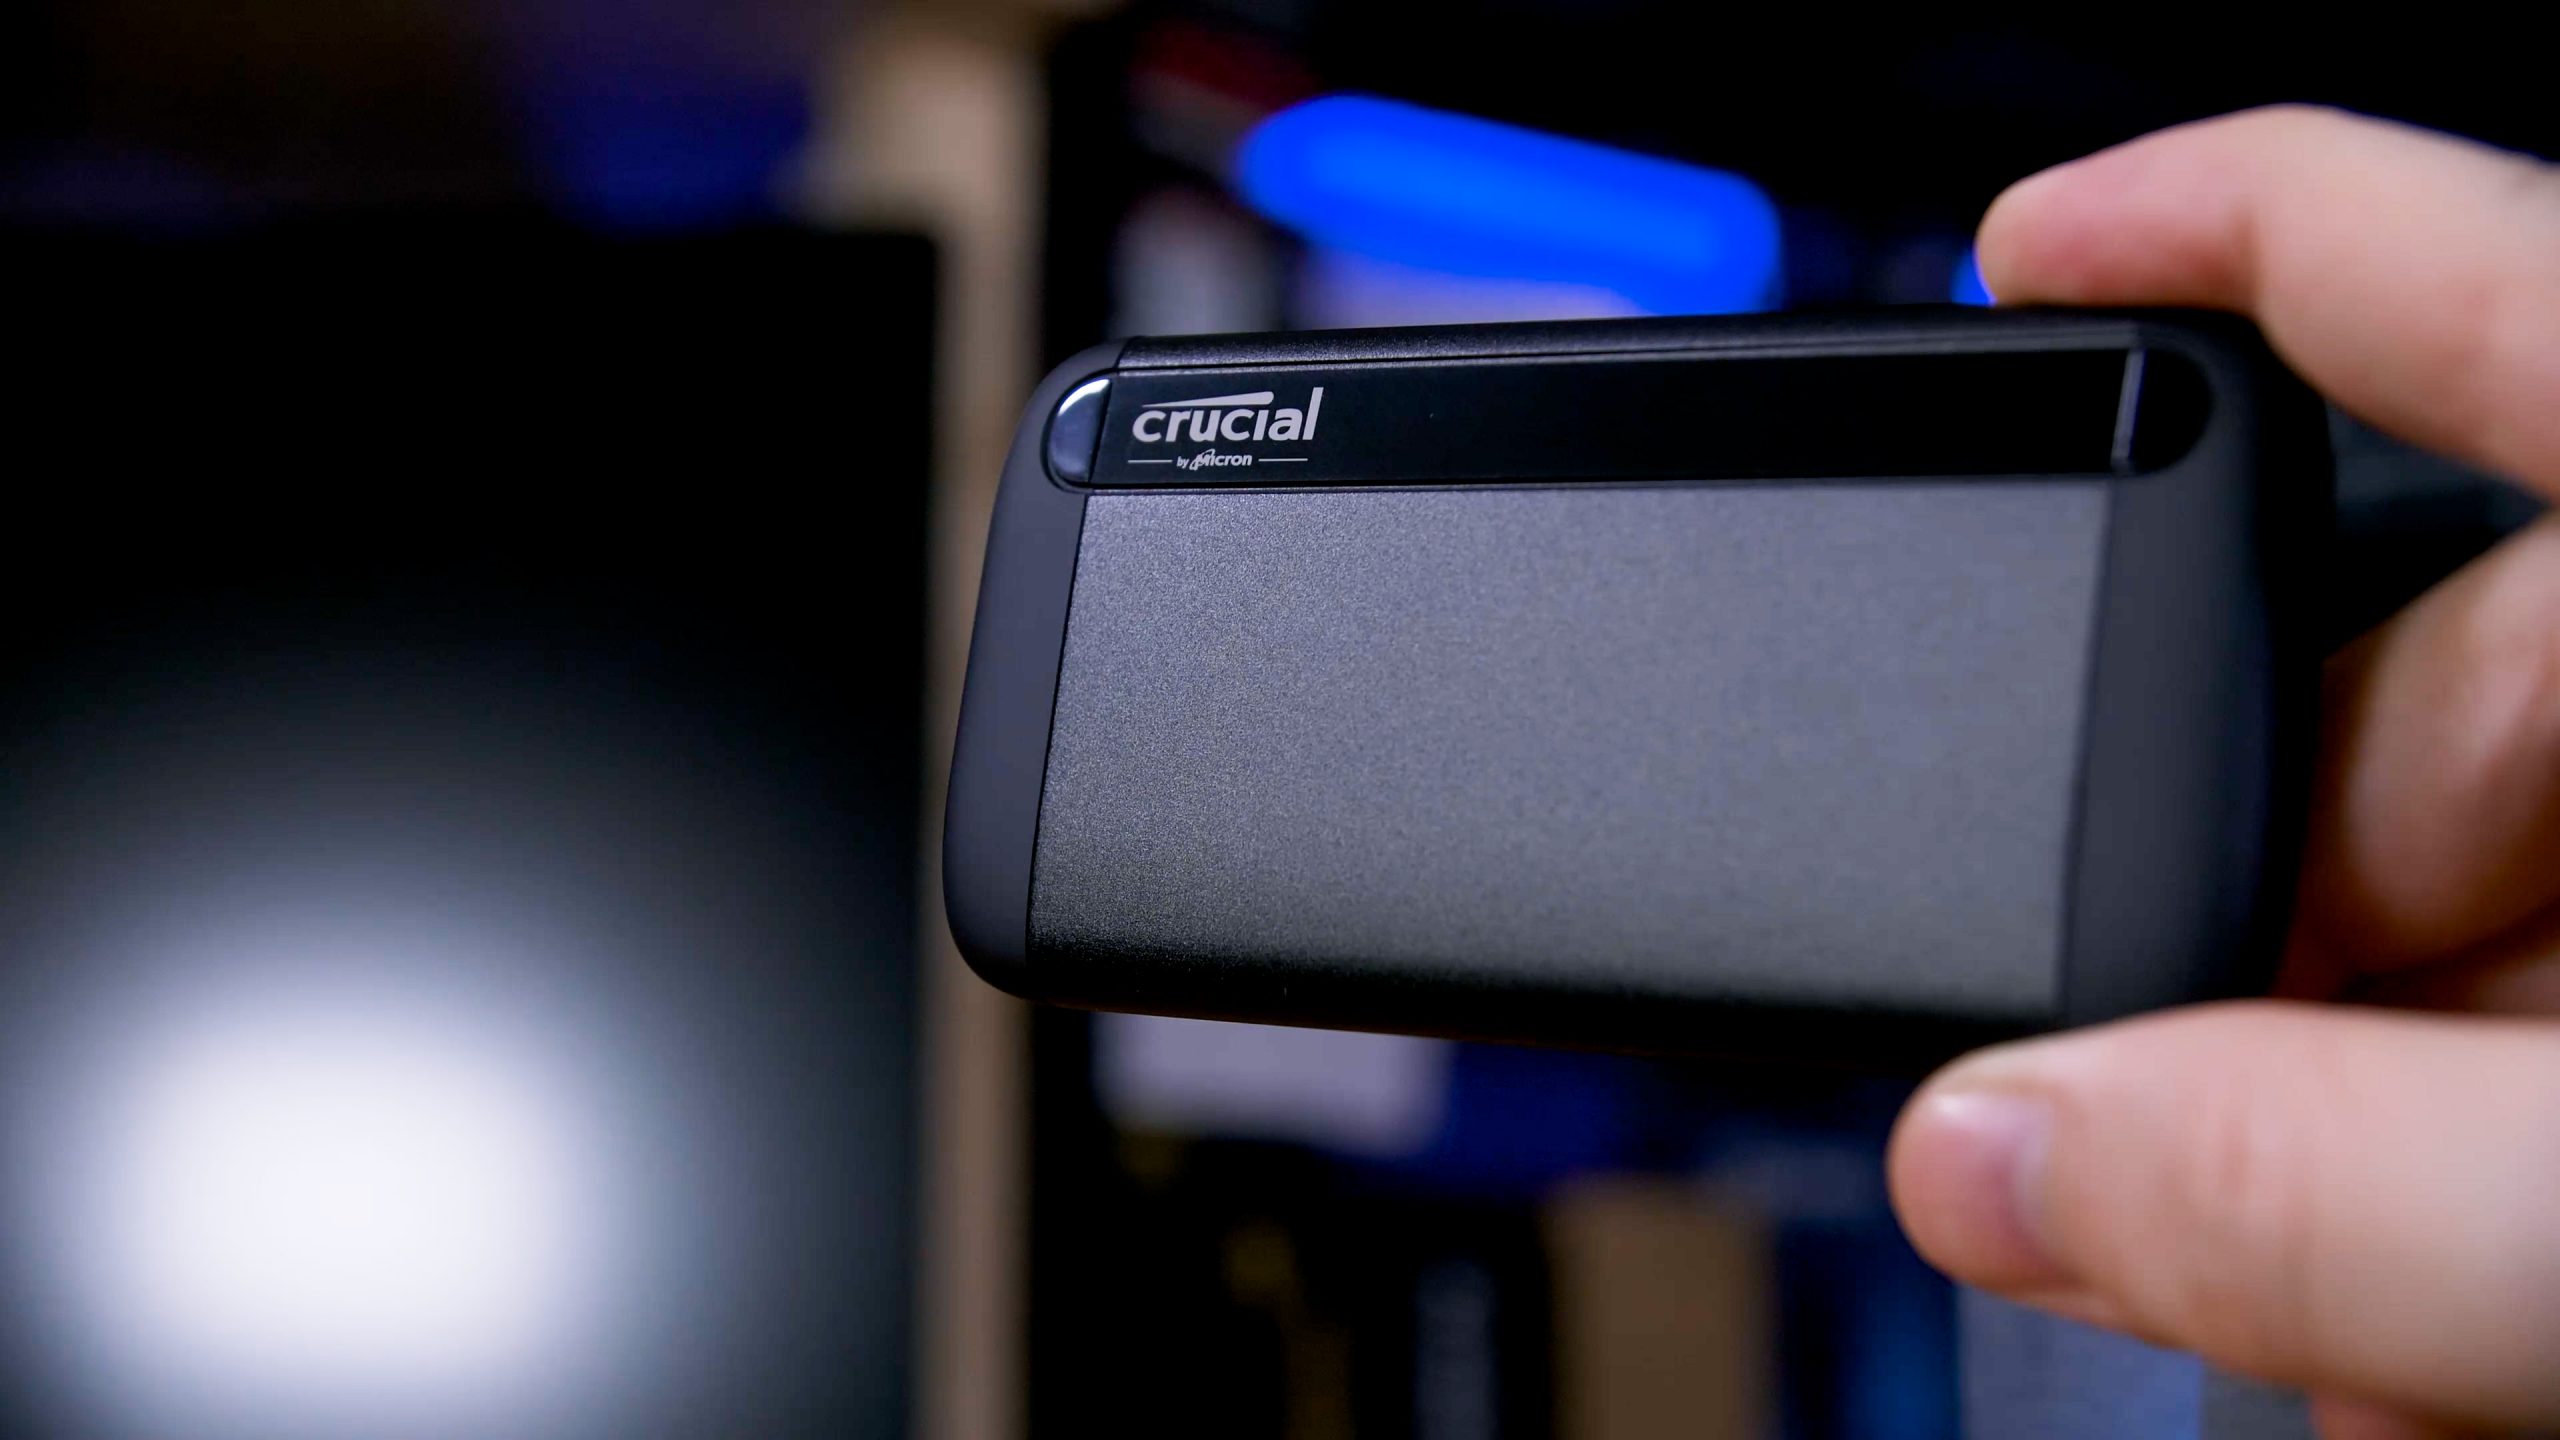 Crucial X8 Portable SSD Review 